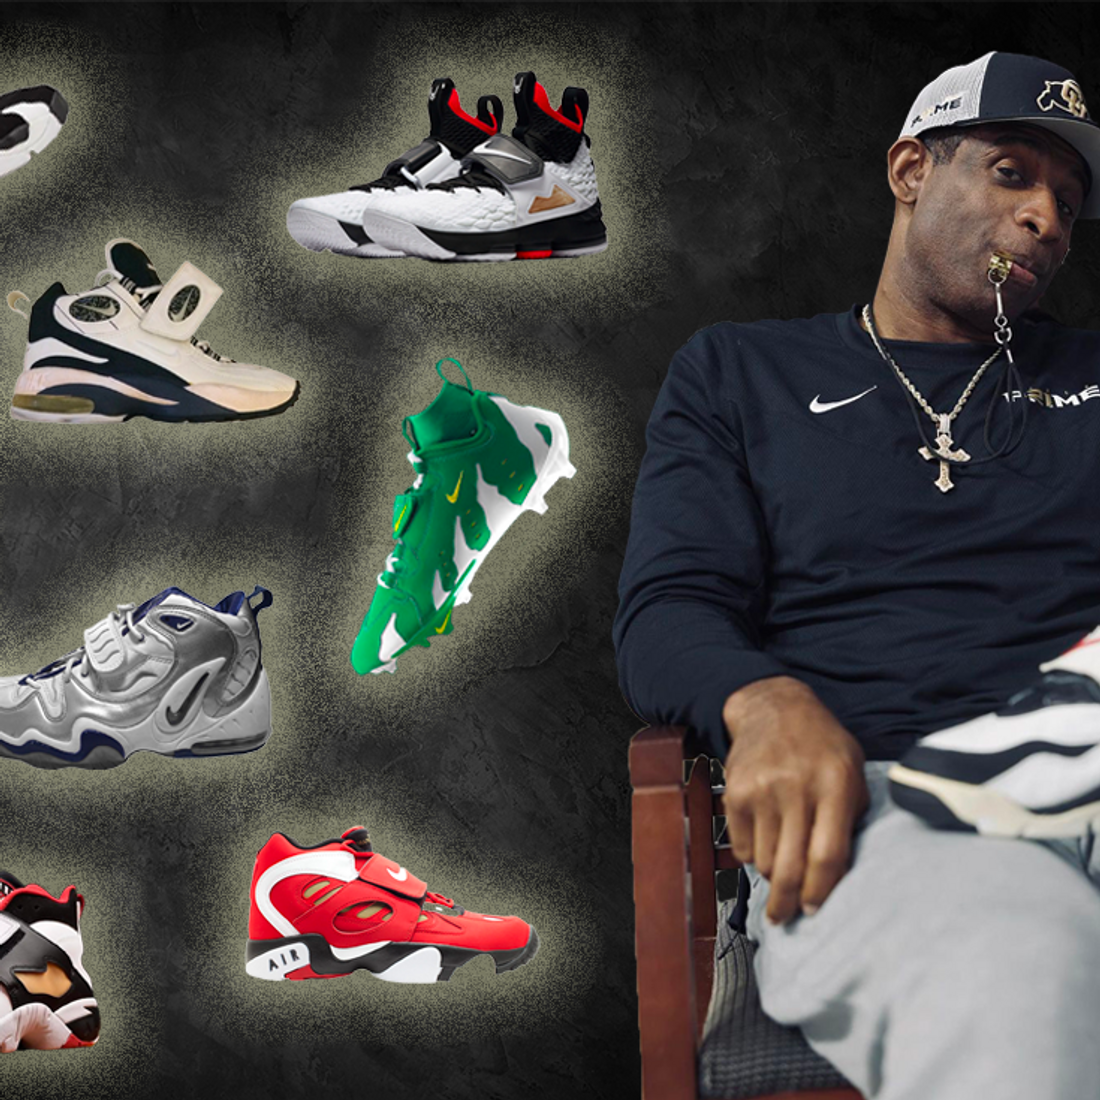 A Brief History of Deion Sanders and the Nike Air Turf - Sneaker Freaker